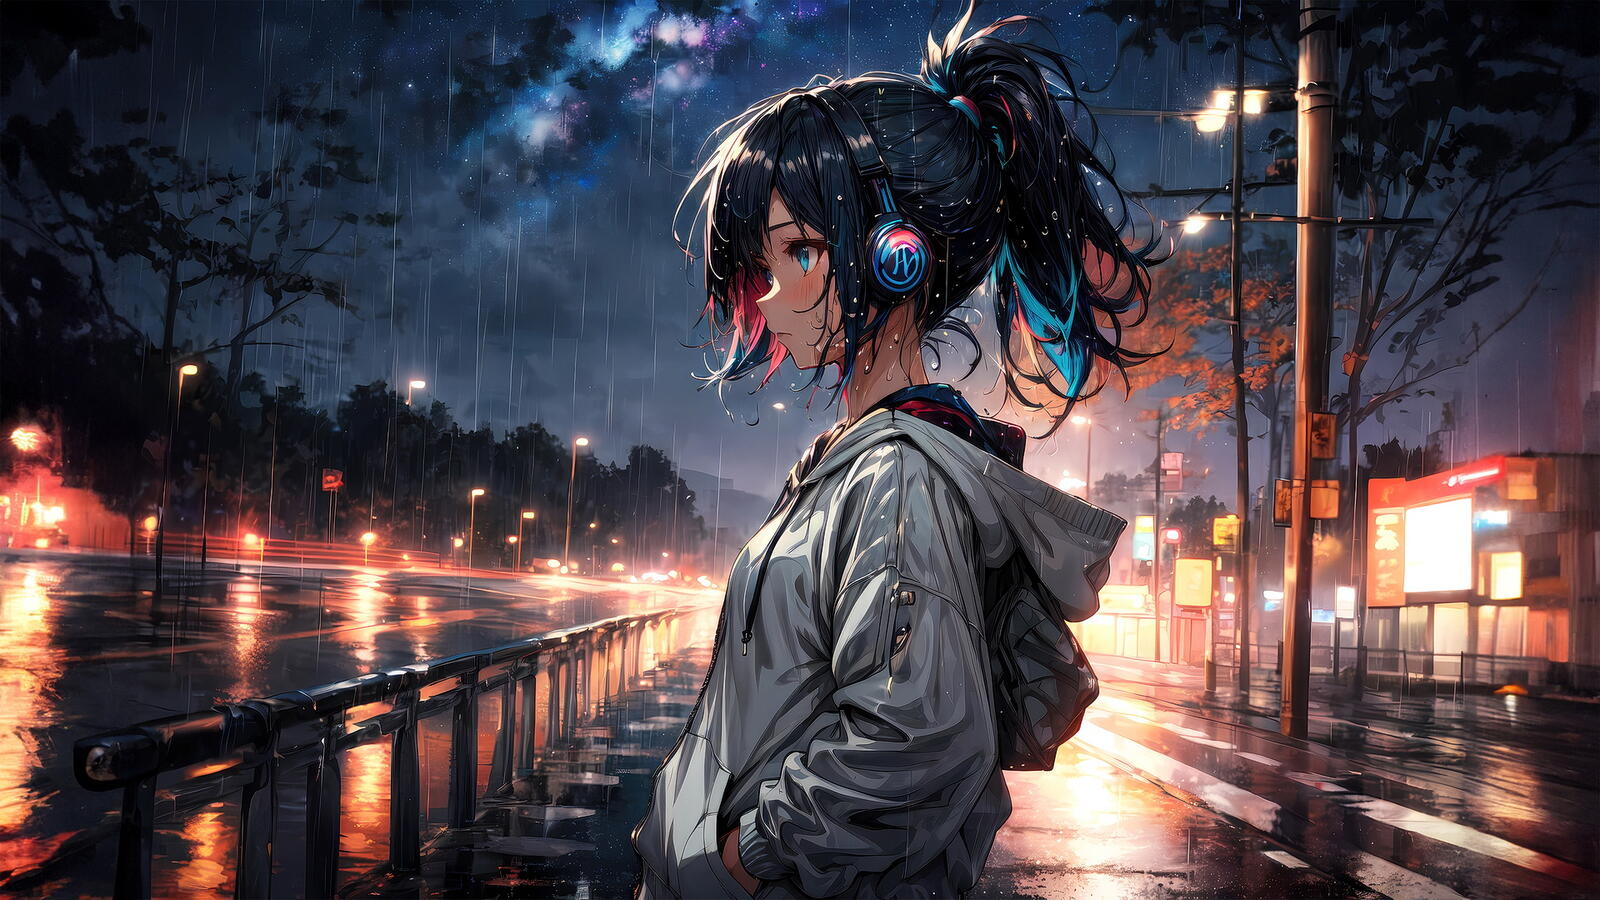 Free photo A girl wearing headphones stands in the rain on a night street